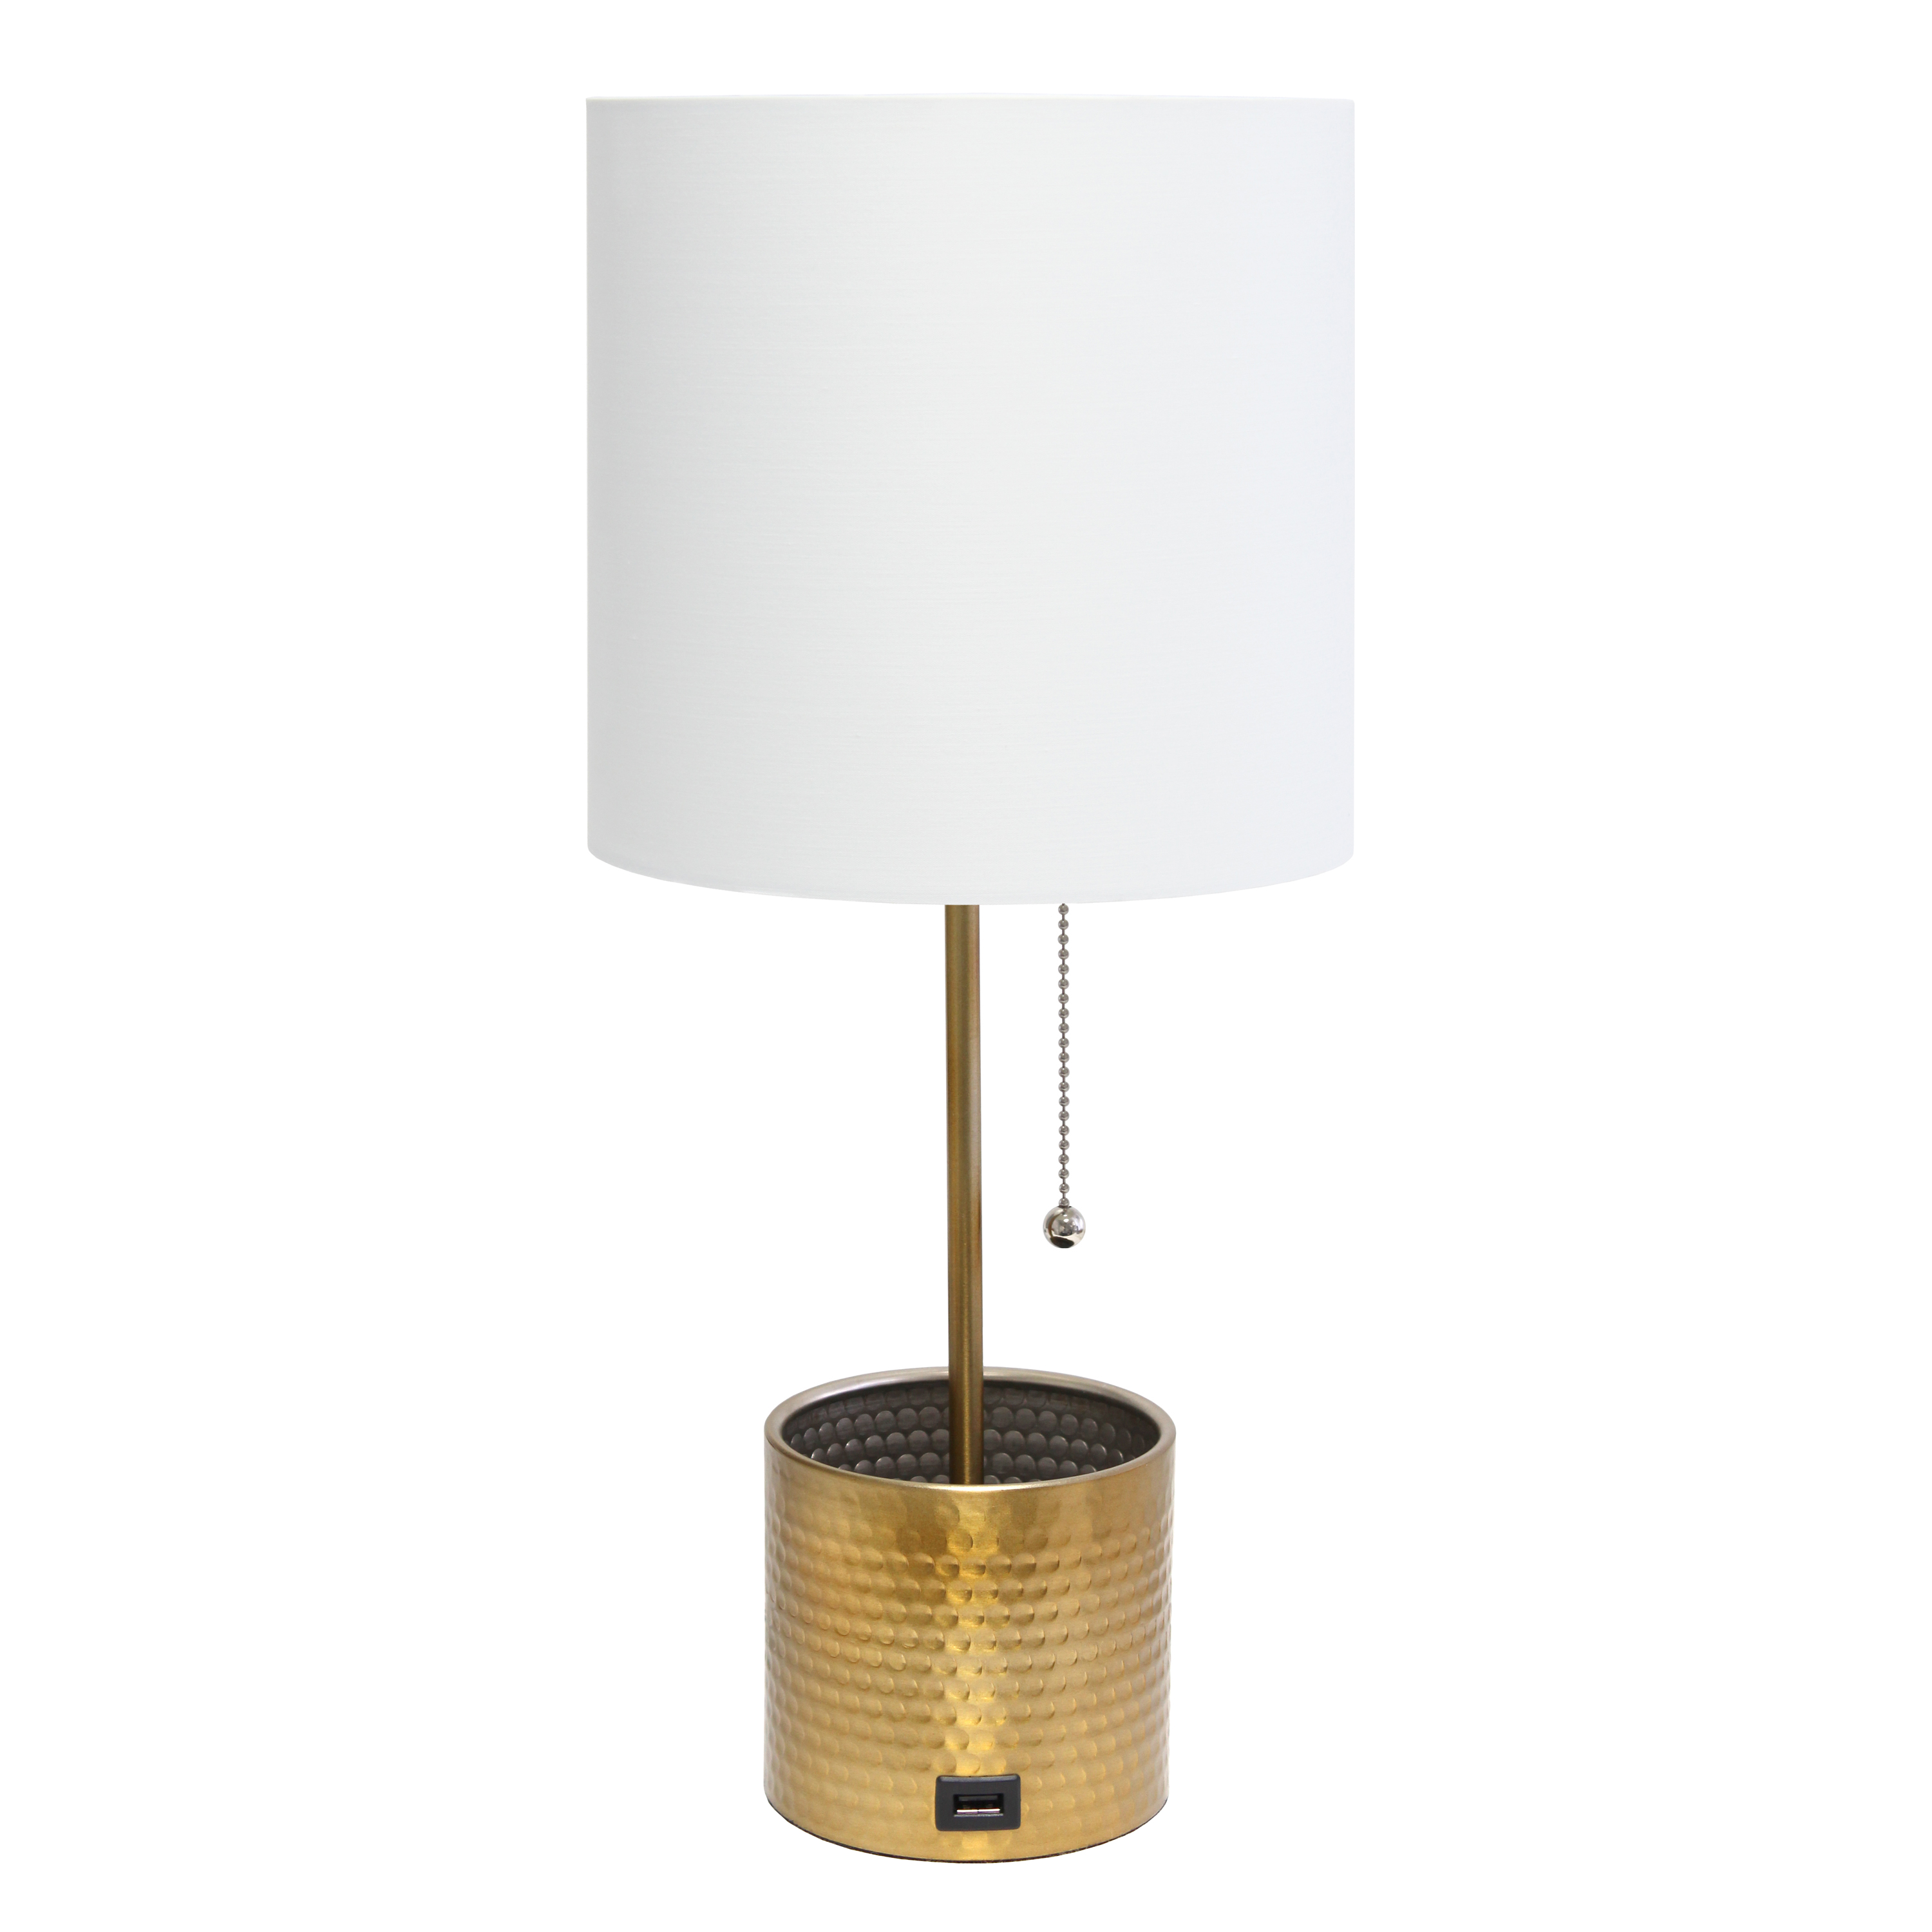  Simple Designs Hammered Metal Organizer Table Lamp with USB charging port and Fabric Shade, Gold